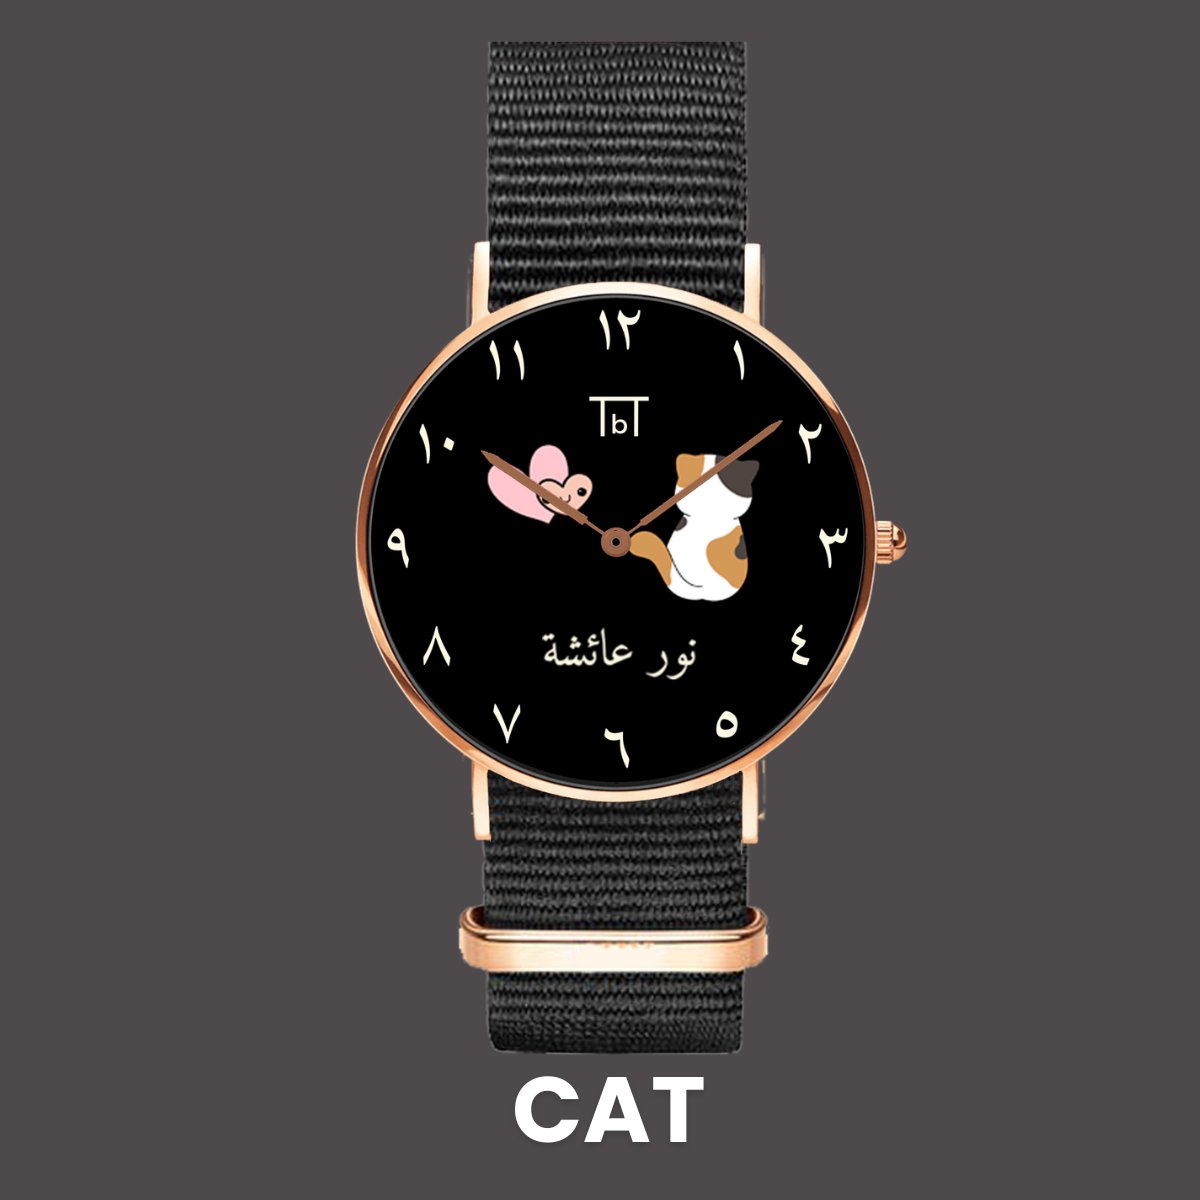 Arabic Rose Gold Black Dial with Black Nato Strap - TbT WatchesTbT Watches